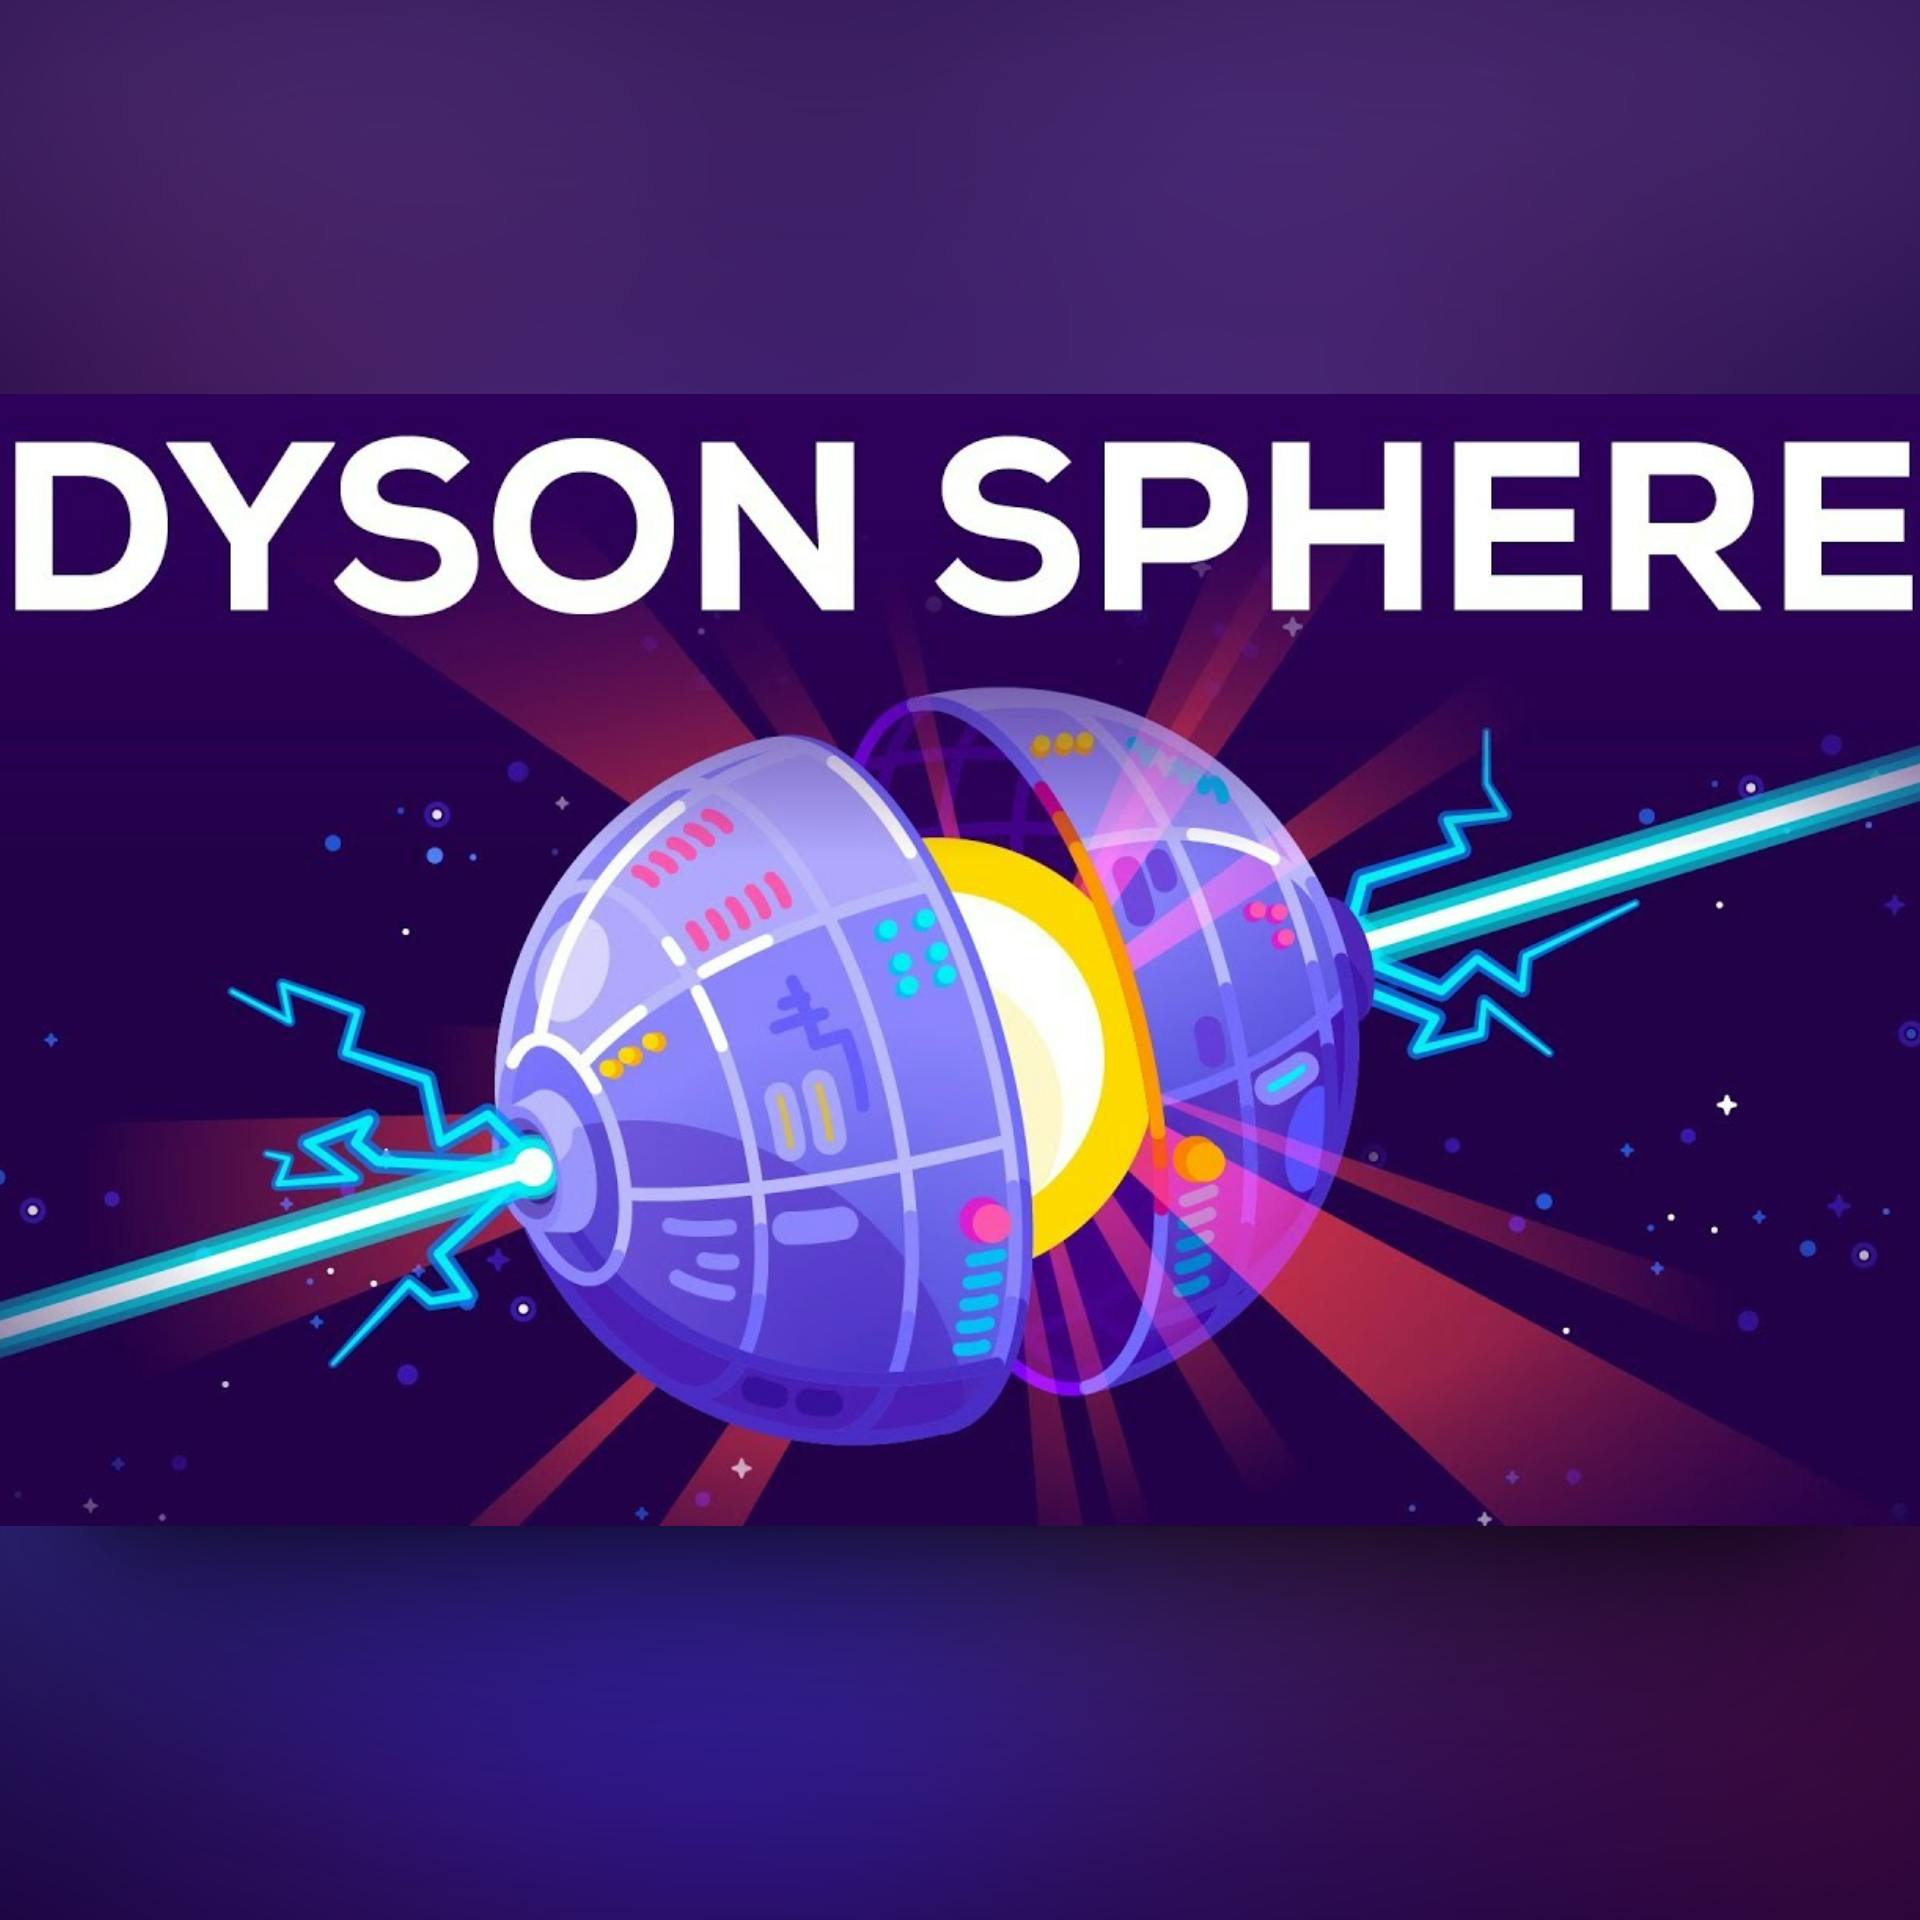 How to Build a Dyson Sphere - The Ultimate Megastructure